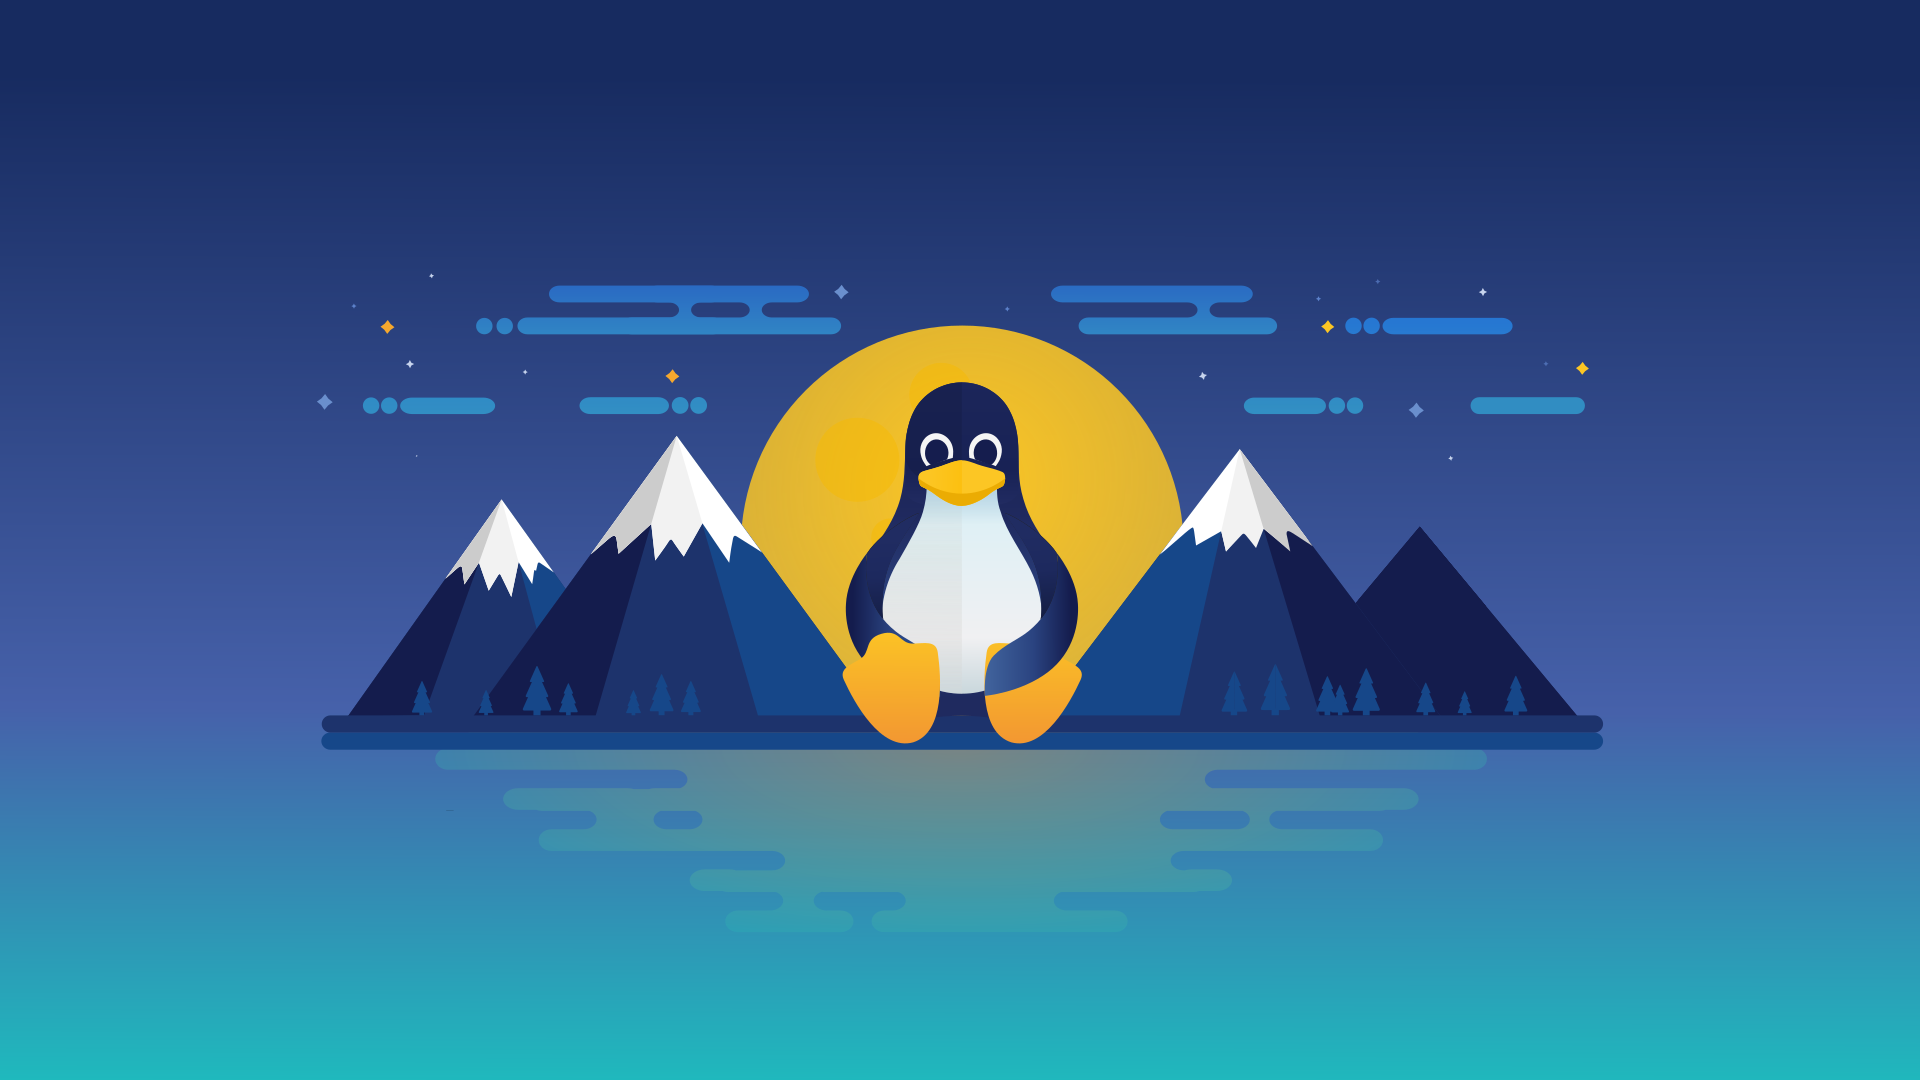 Linux Penguin Wallpapers